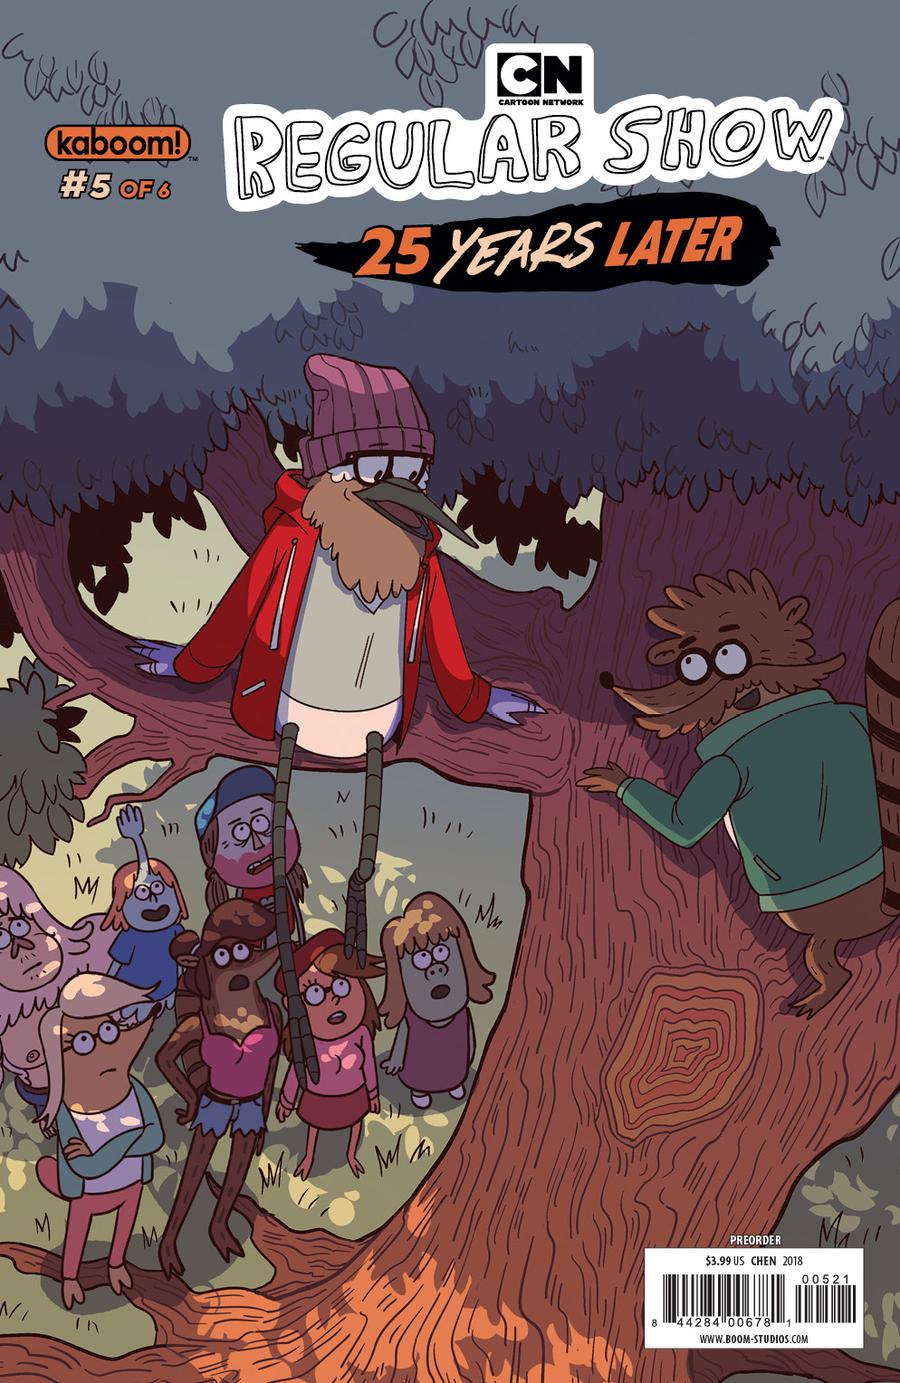 Regular Show 25 Years Later #5 Cover B Variant Ling Chen Subscription Cover